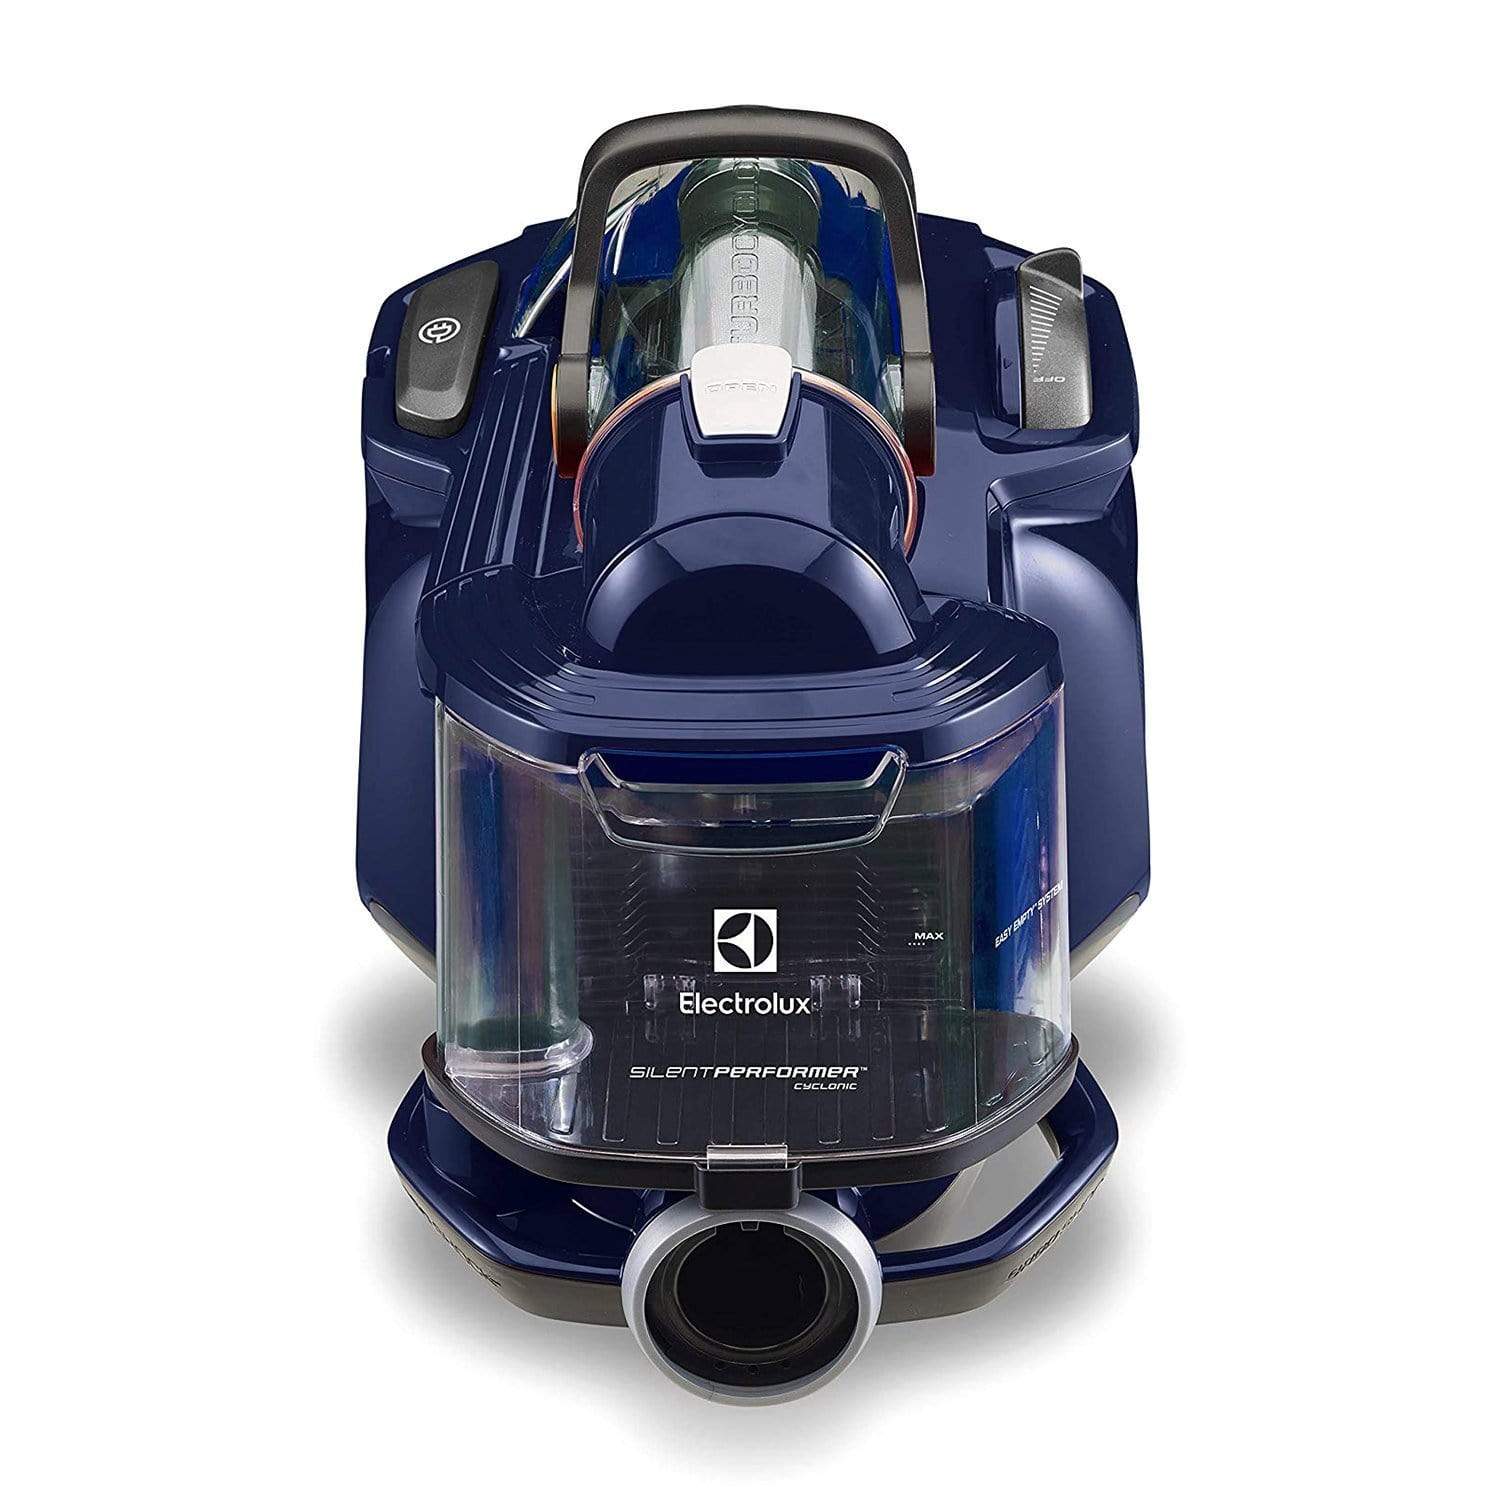 Electrolux Cyclonic 1.4 Litres Vacuum Cleaner - Blue - ZSPC2000 - Jashanmal Home